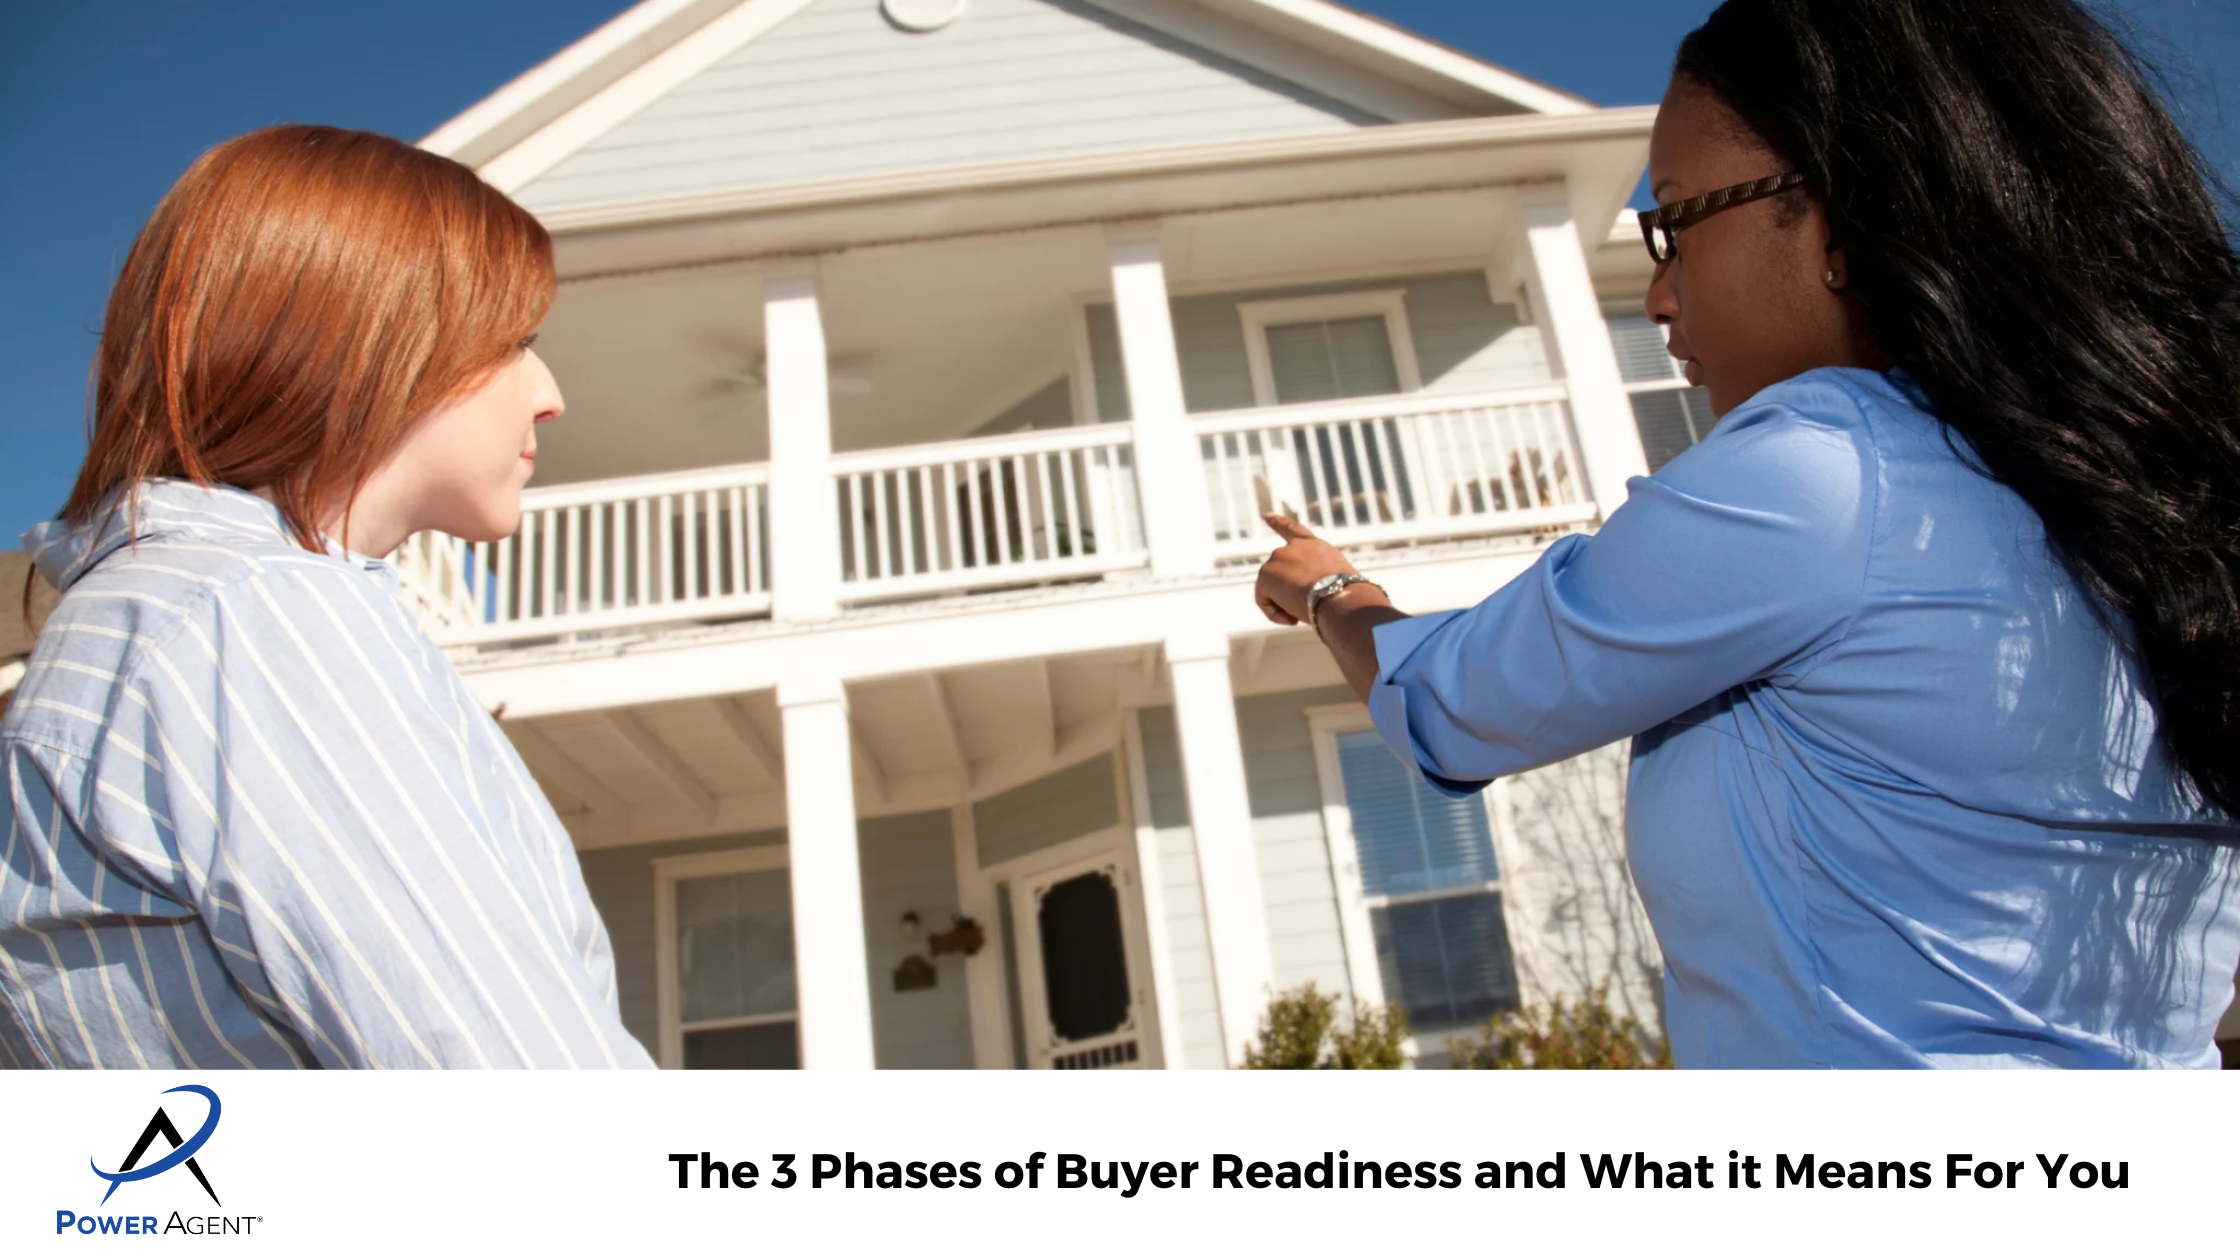 The 3 Phases of Buyer Readiness and What it Means For You